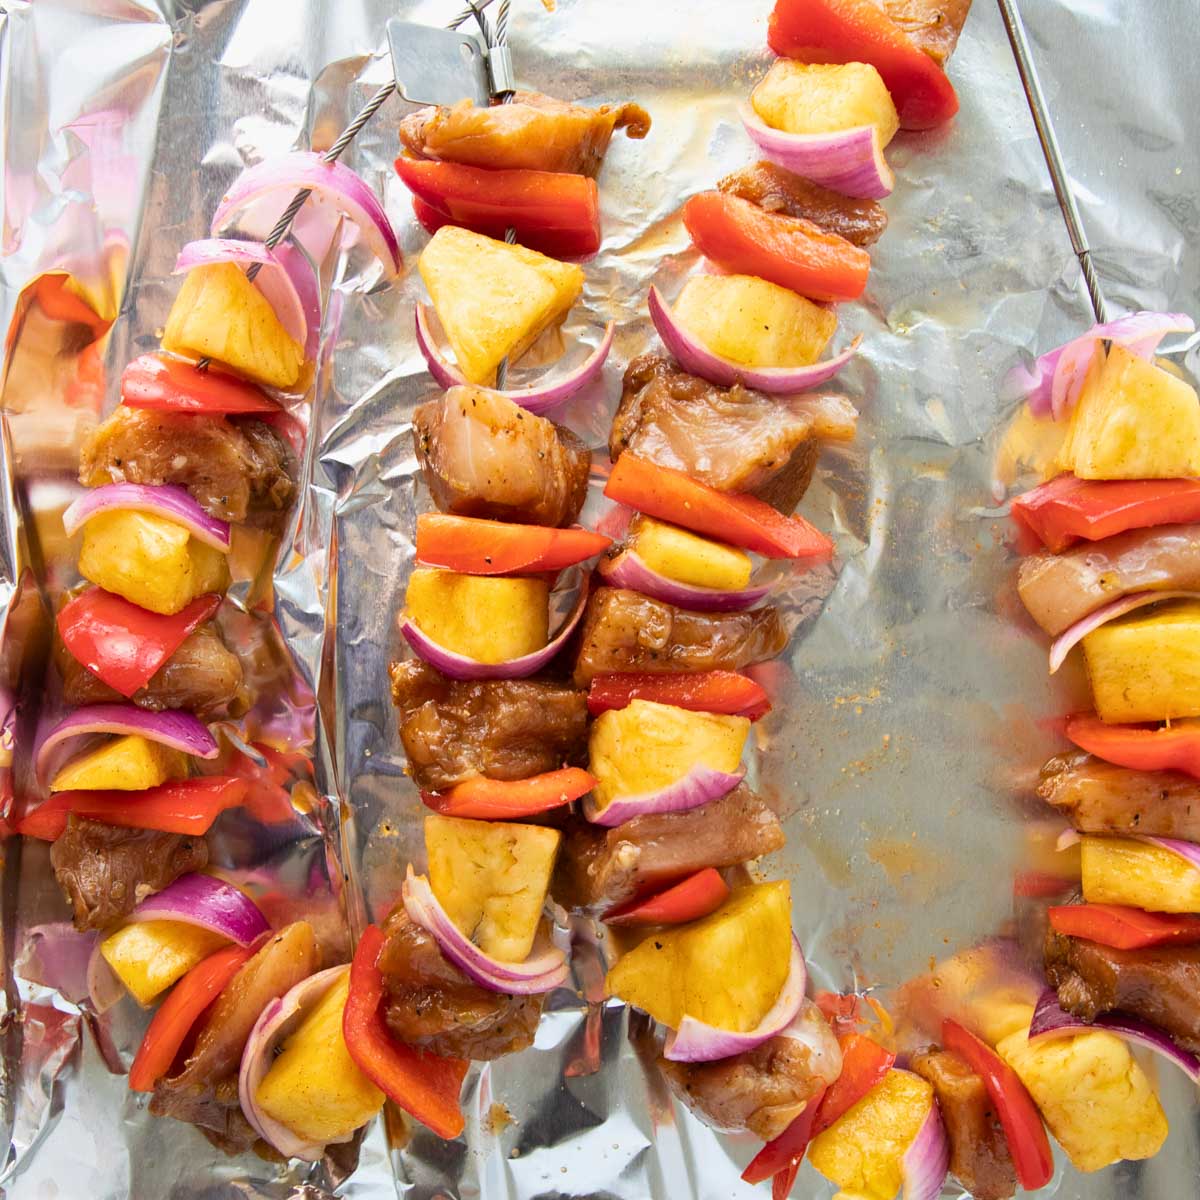 kabobs threaded with chicken, red peppers, onions and pineapple